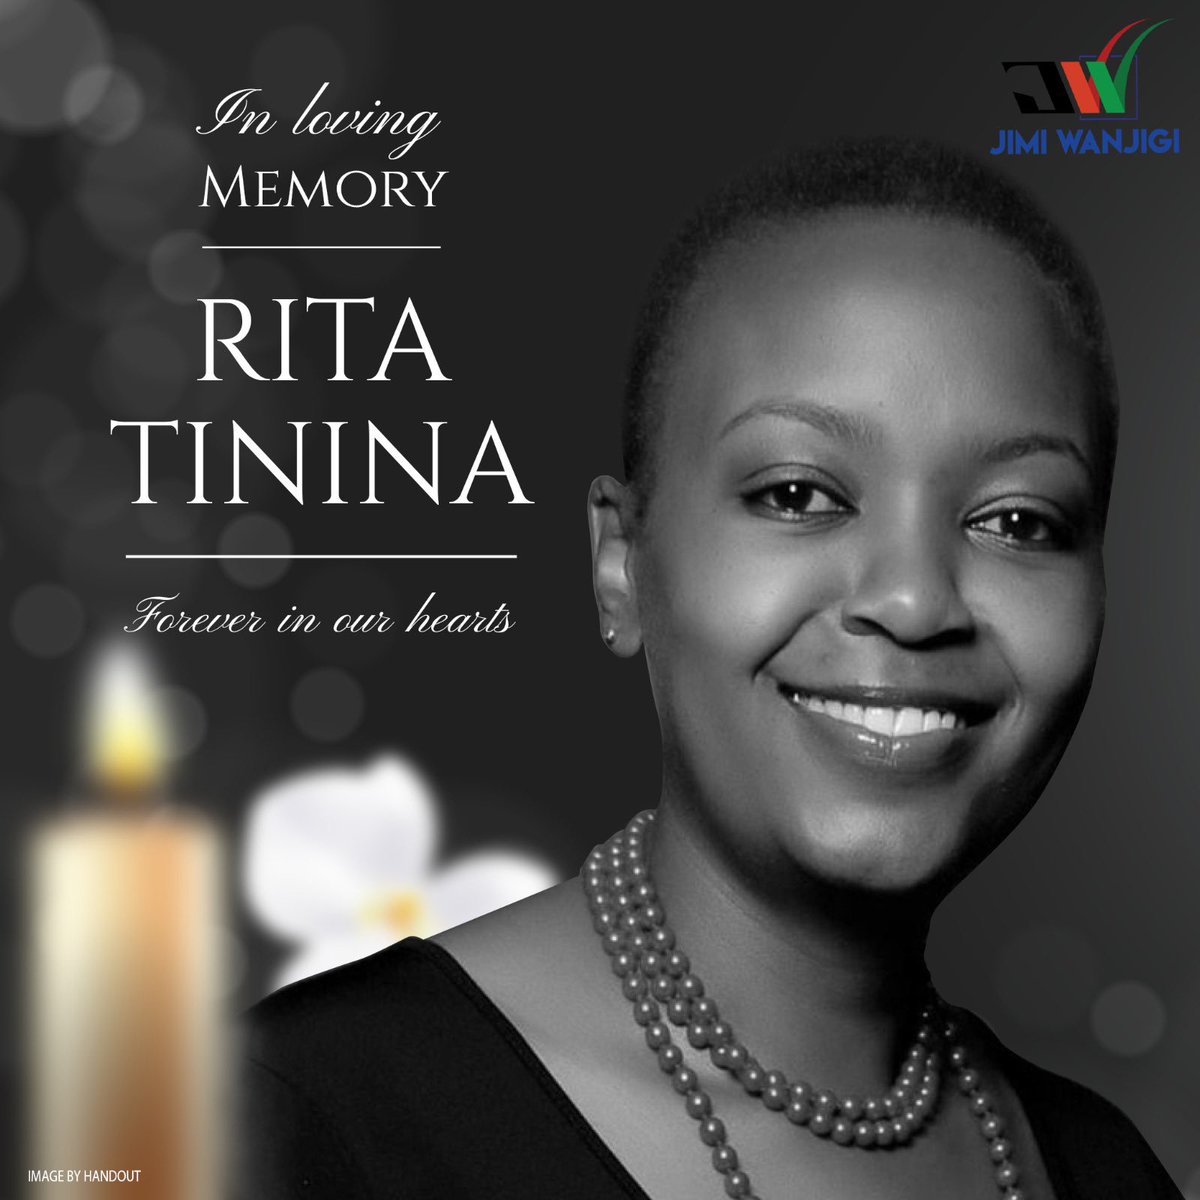 I express my deepest sympathies to the family of Rita Tinina on hearing of her passing. Her contribution to the media industry has been commendable and her loss has left a void that will be felt by many. We honour her memory and the legacy she leaves behind. May her family find…